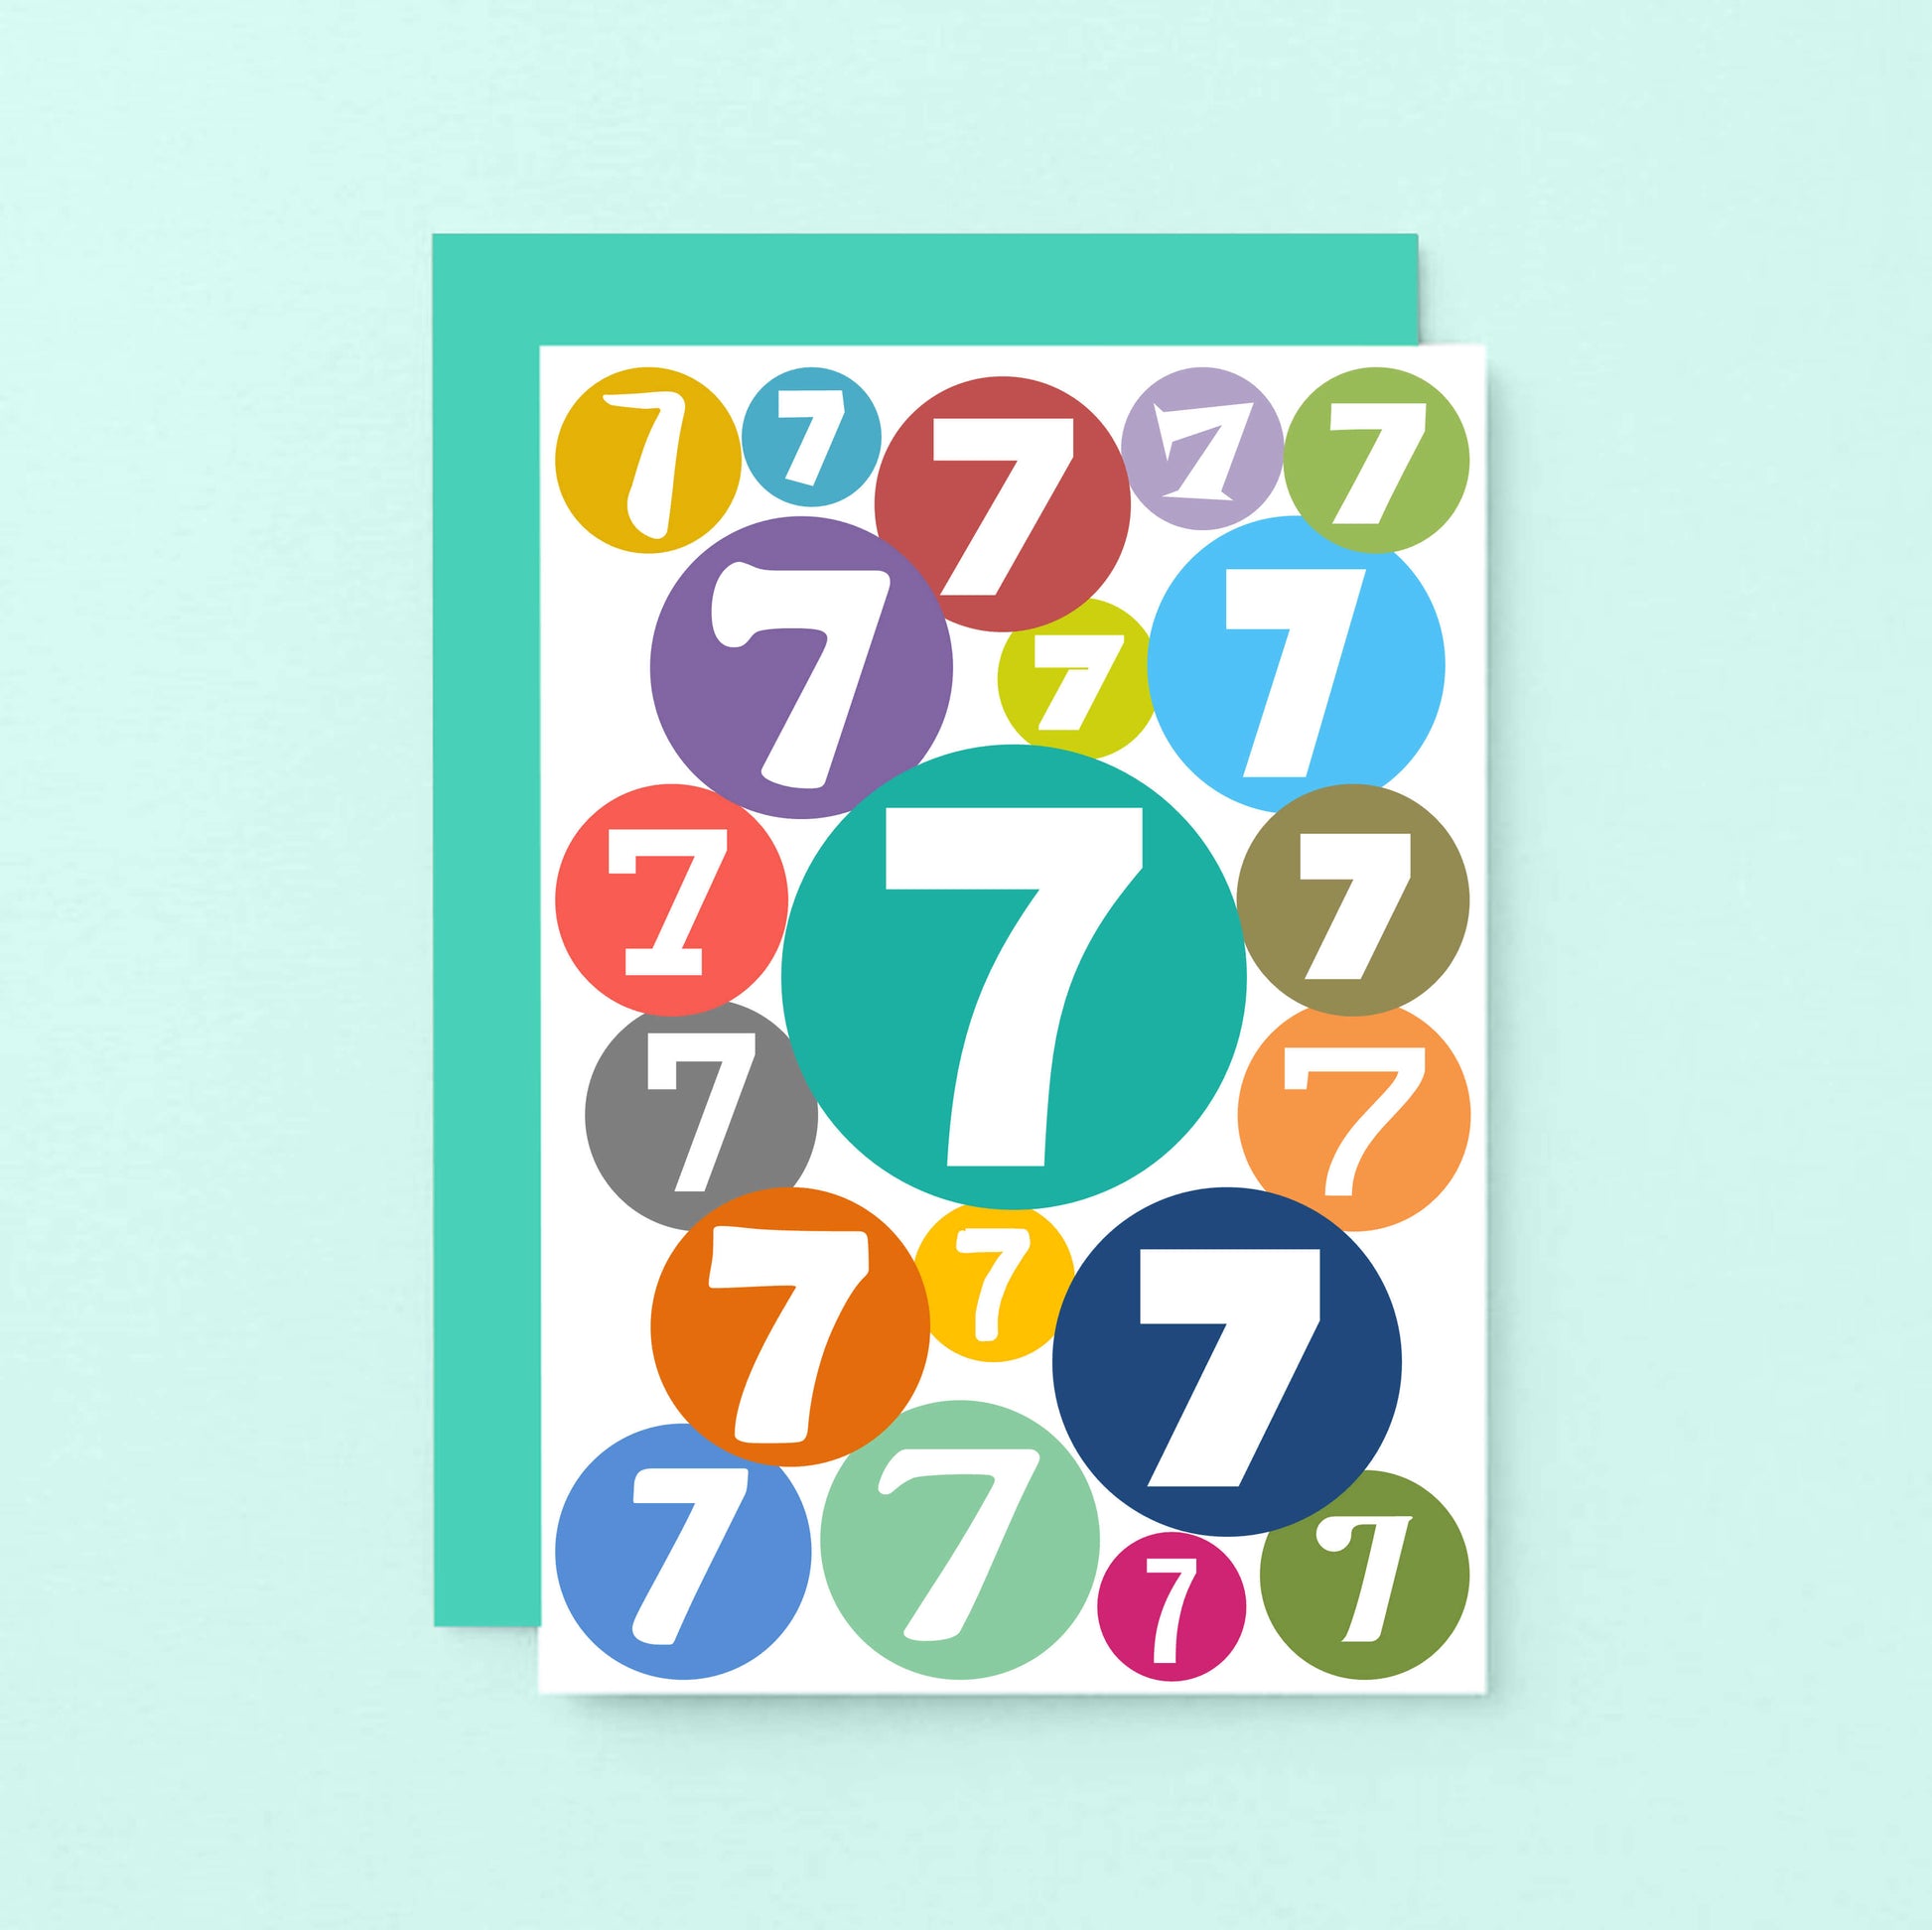 7th Birthday Card by SixElevenCreations. Product Code SE2067A6